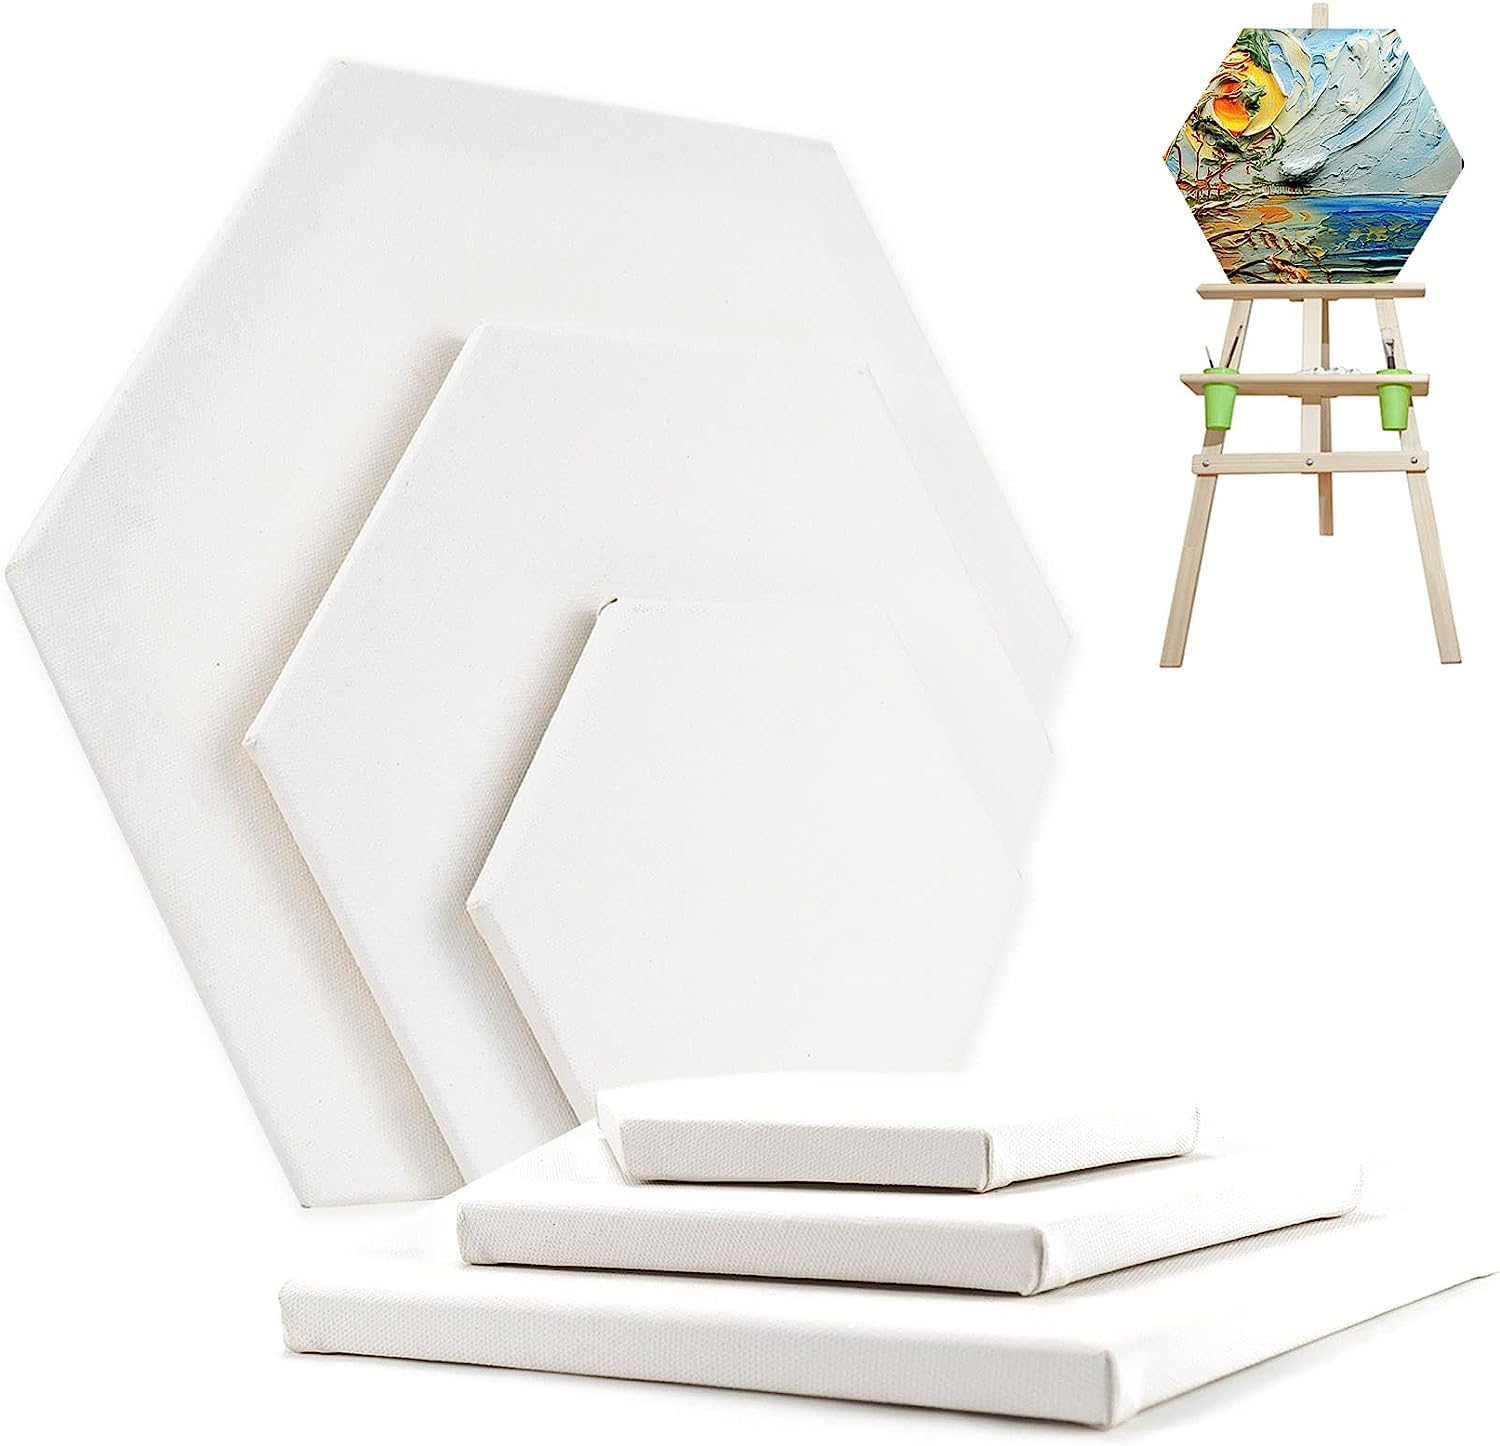 Hexagon Stretched Blank Canvas for Painting White [...]